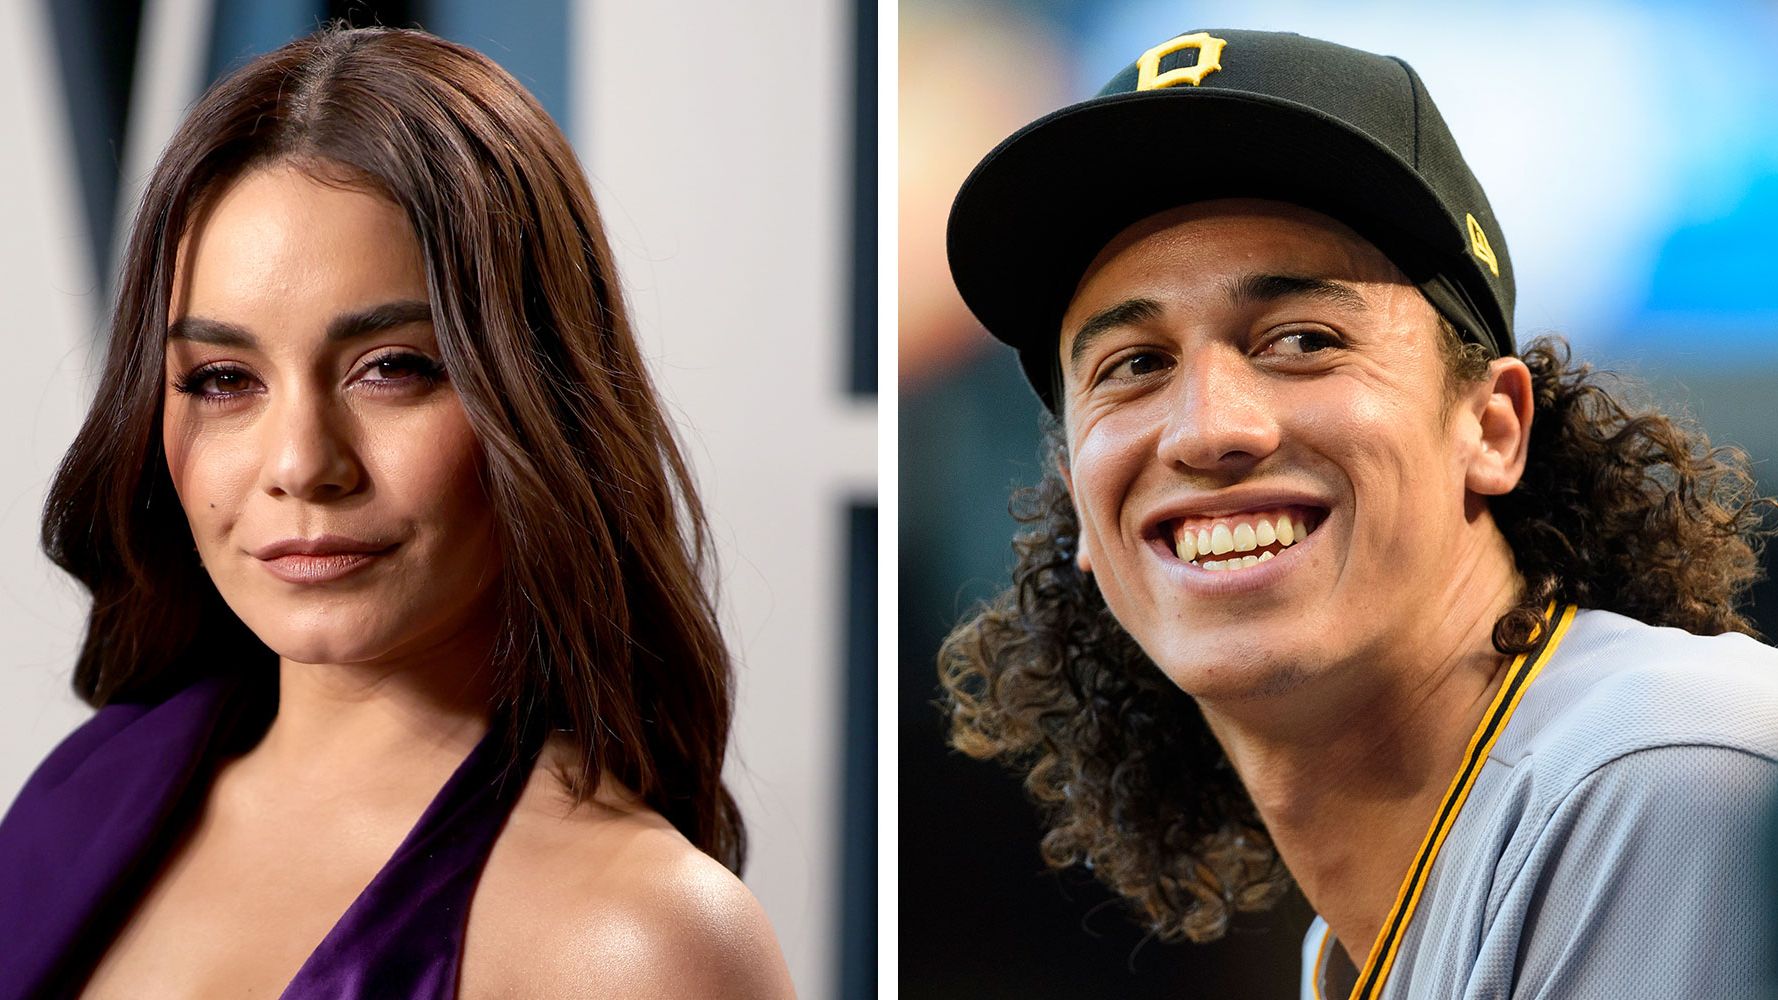 Vanessa Hudgens shares a loved up selfie with MLB boyfriend Cole